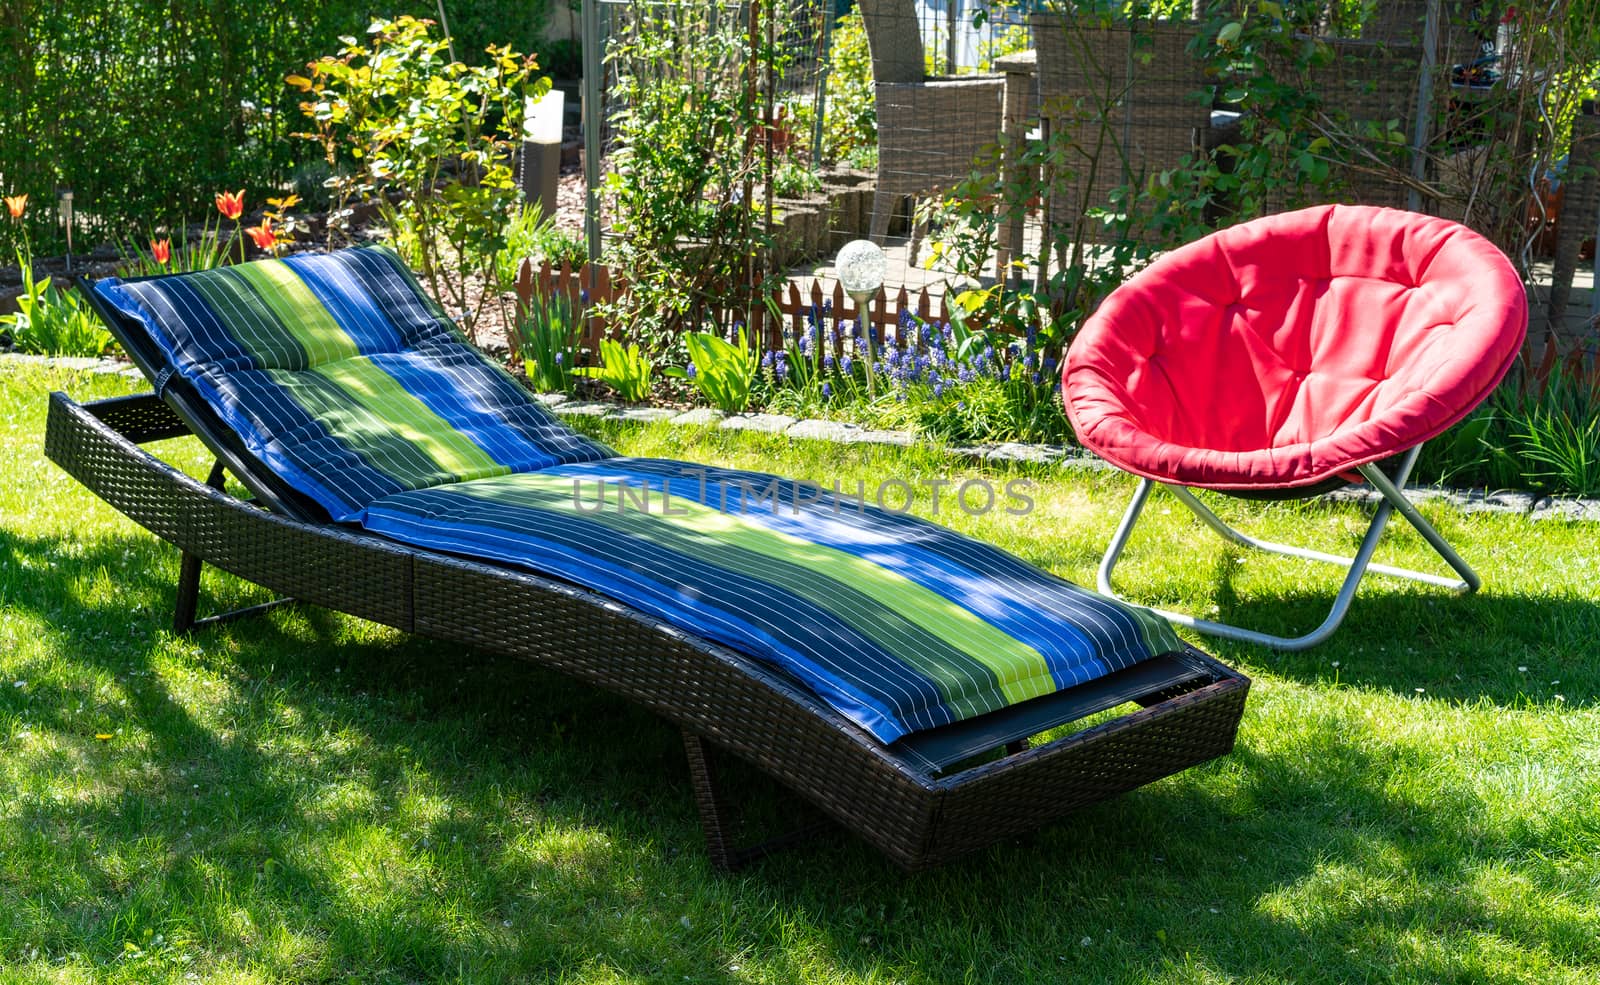 A blue and green sun lounger and a red folding moon chair in a garden in the sun. by daniel_albach